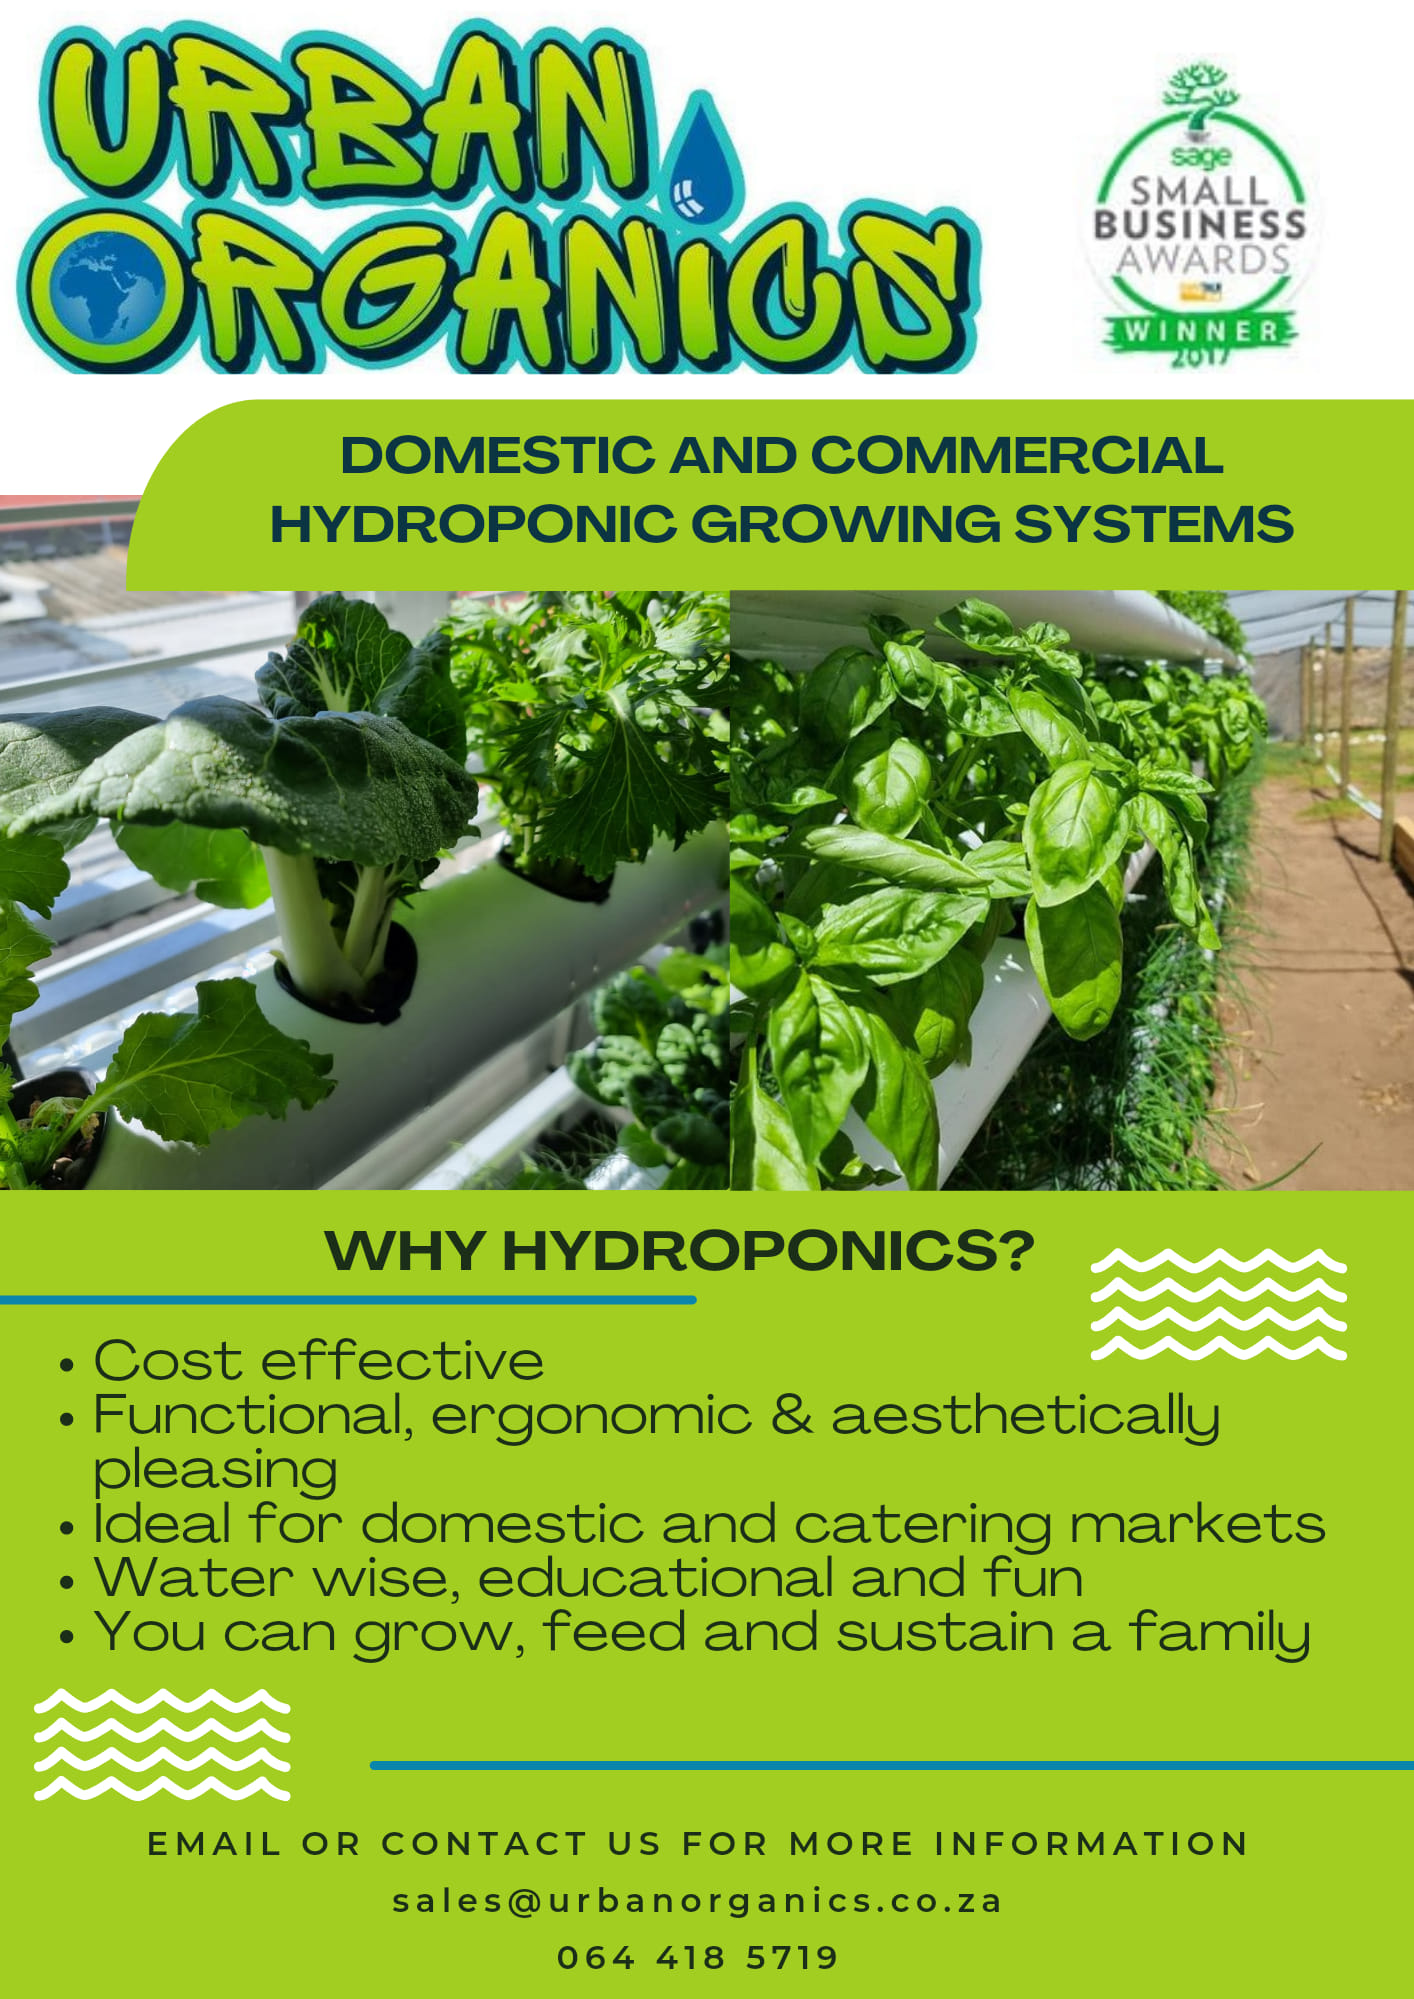 Domestic and commercial hydroponic growing systems